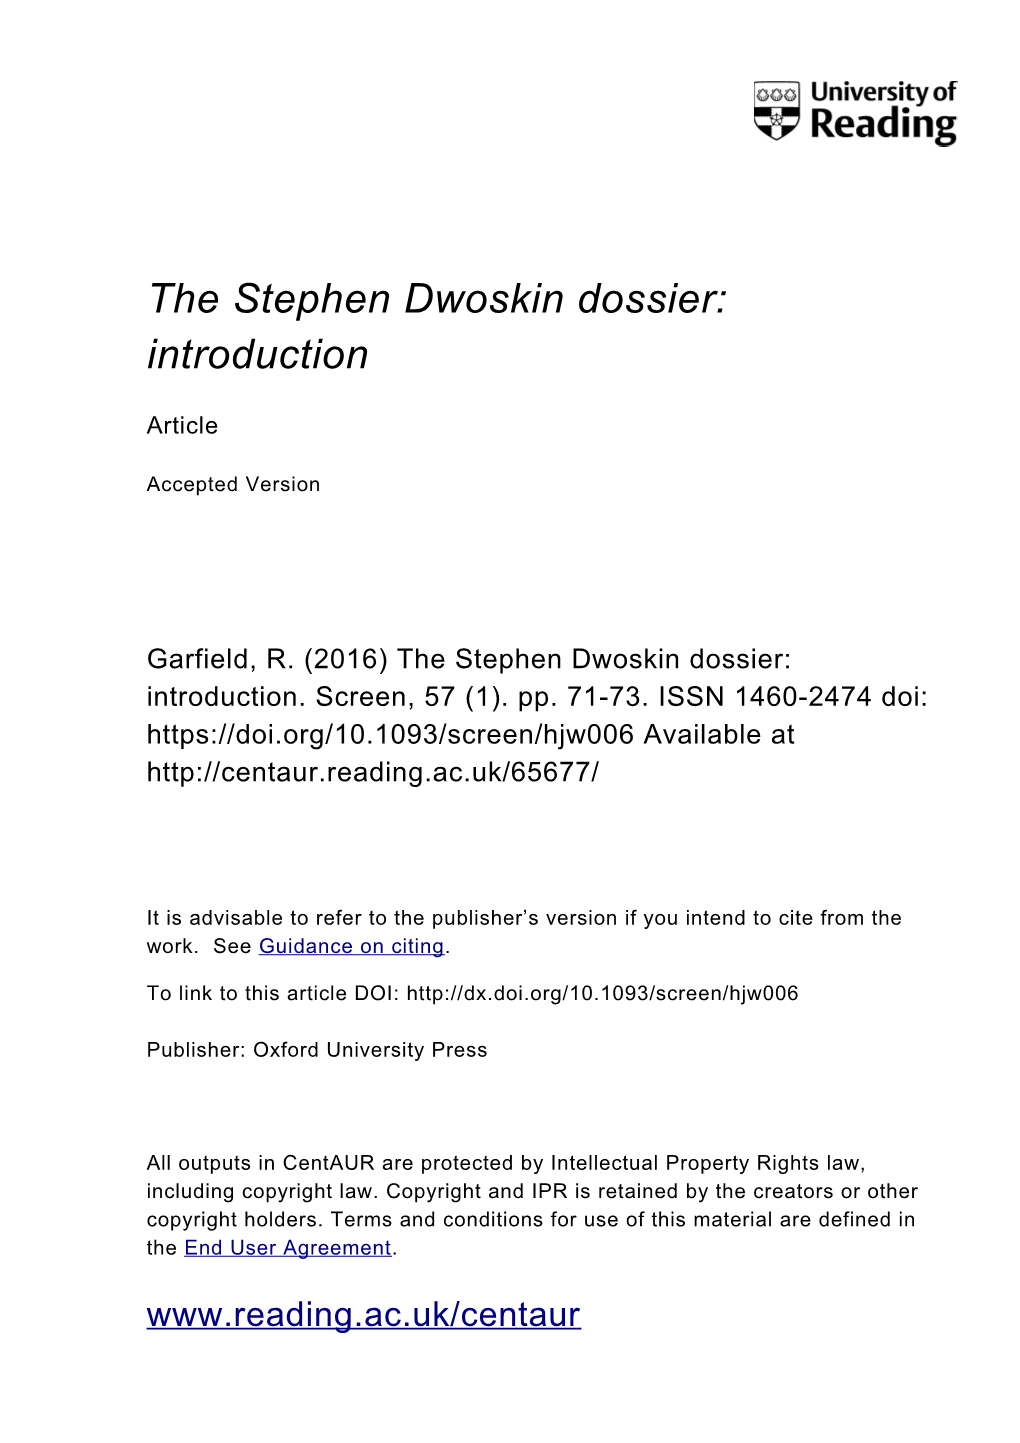 The Stephen Dwoskin Dossier: Introduction